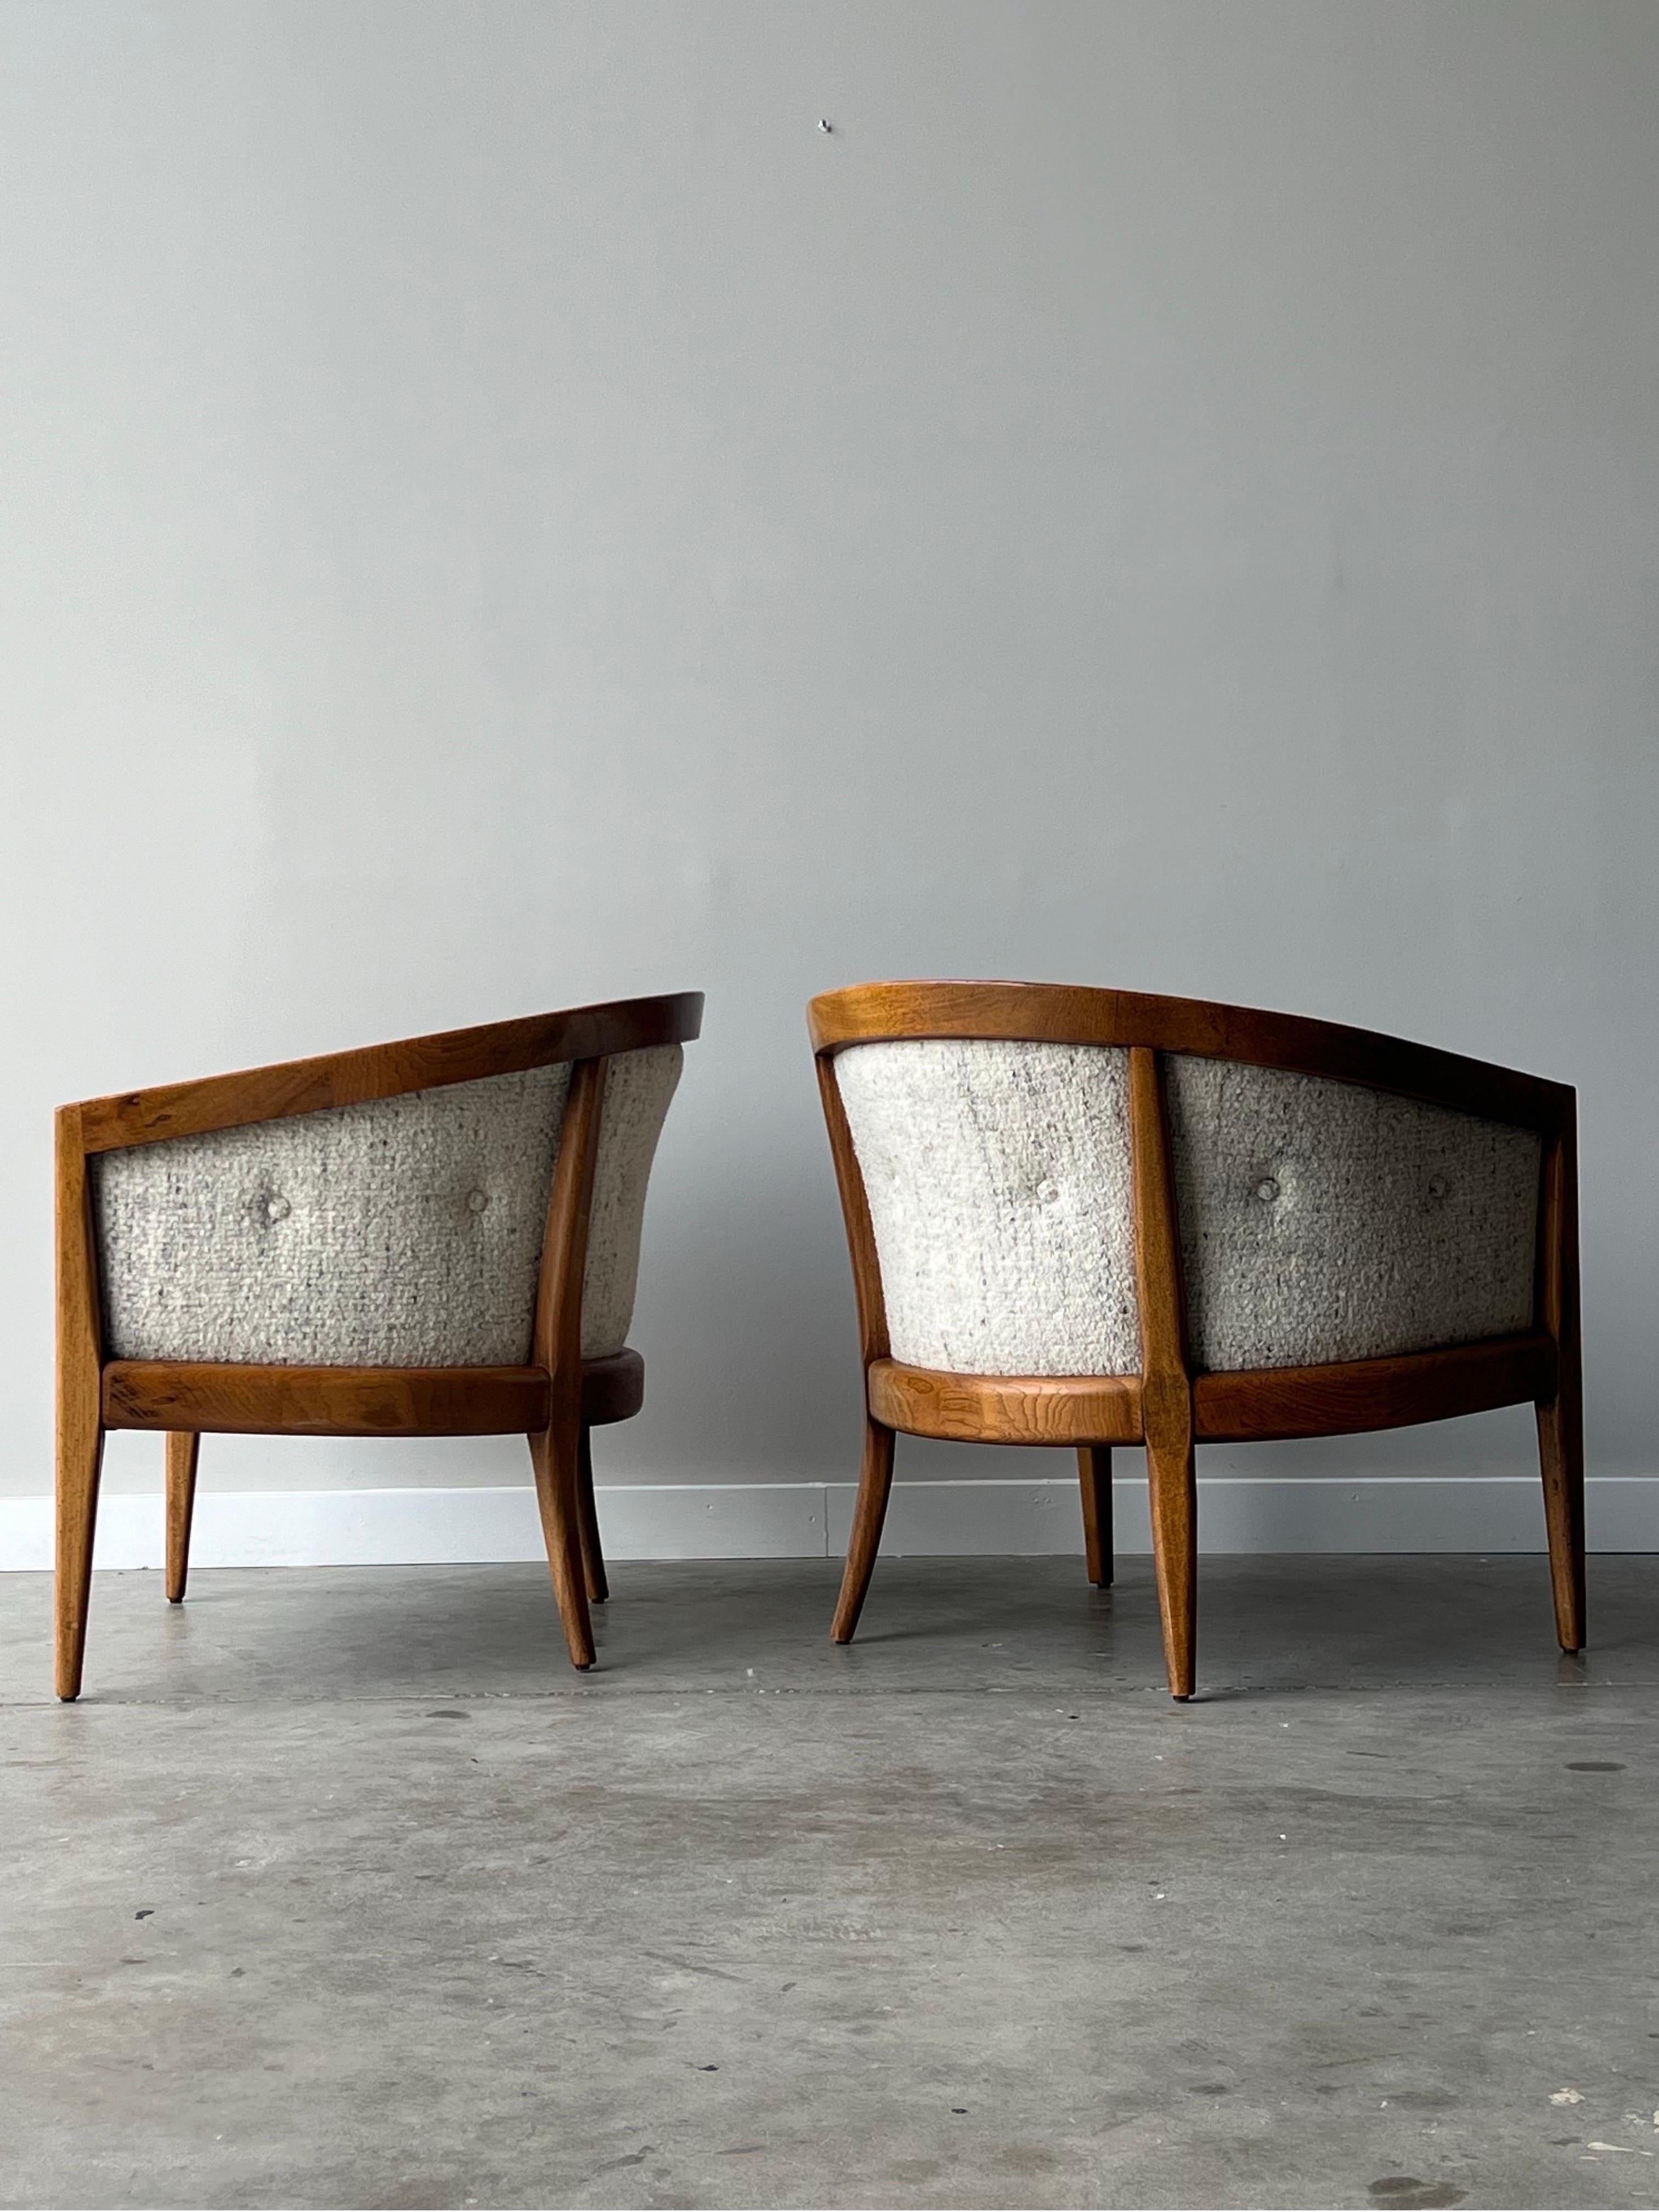 A pair of mid-century lounge chairs by Founders. This pair has so much to offer. Sculpted walnut wraps around the back of the chair contouring the rounded back. The walnut has a warm and vibrant wood grain. The chairs sit on tapered walnut legs. The